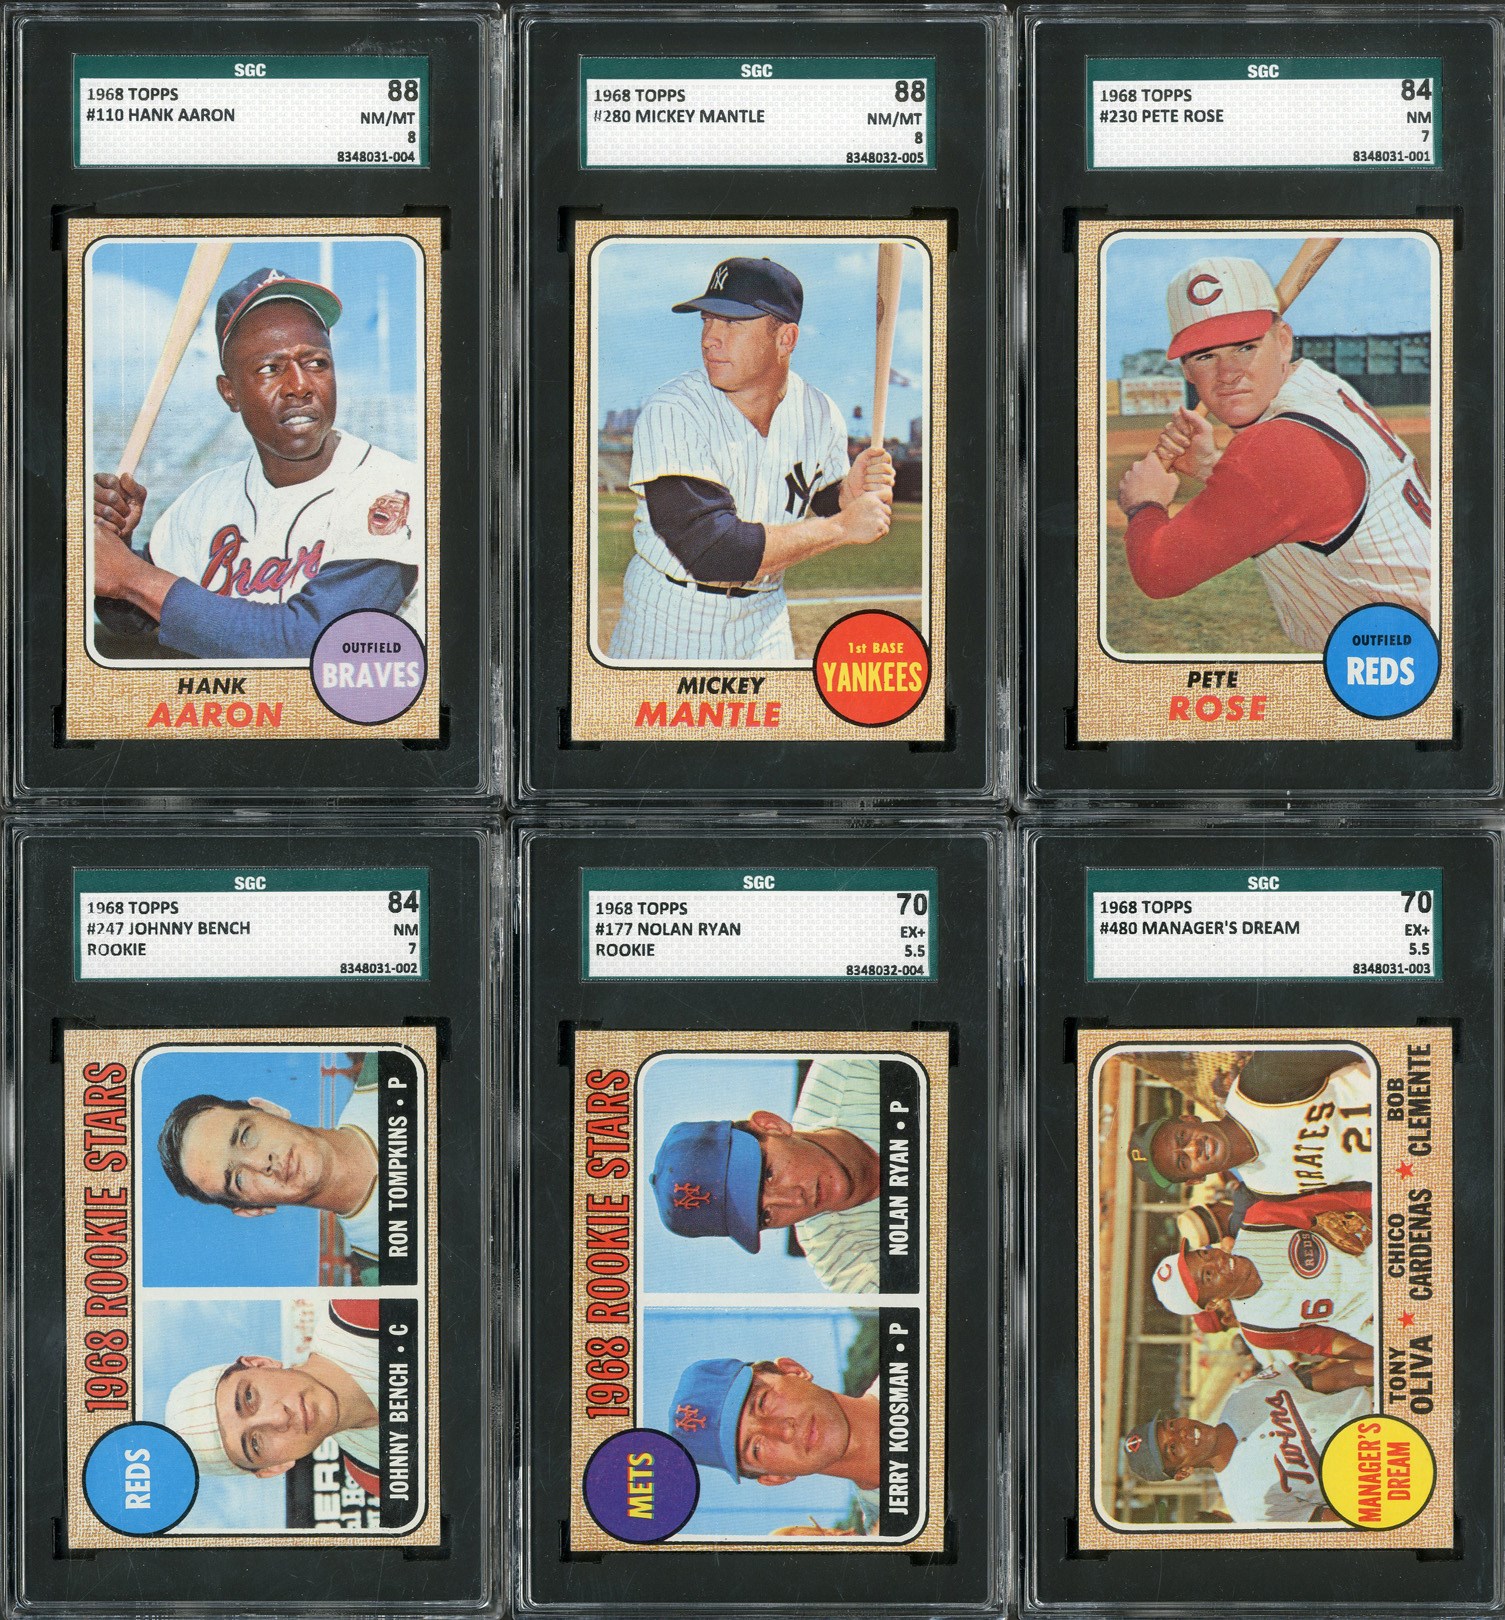 Baseball and Trading Cards - 1968 Topps Complete Set (598 Cards - 6 SGC Graded)